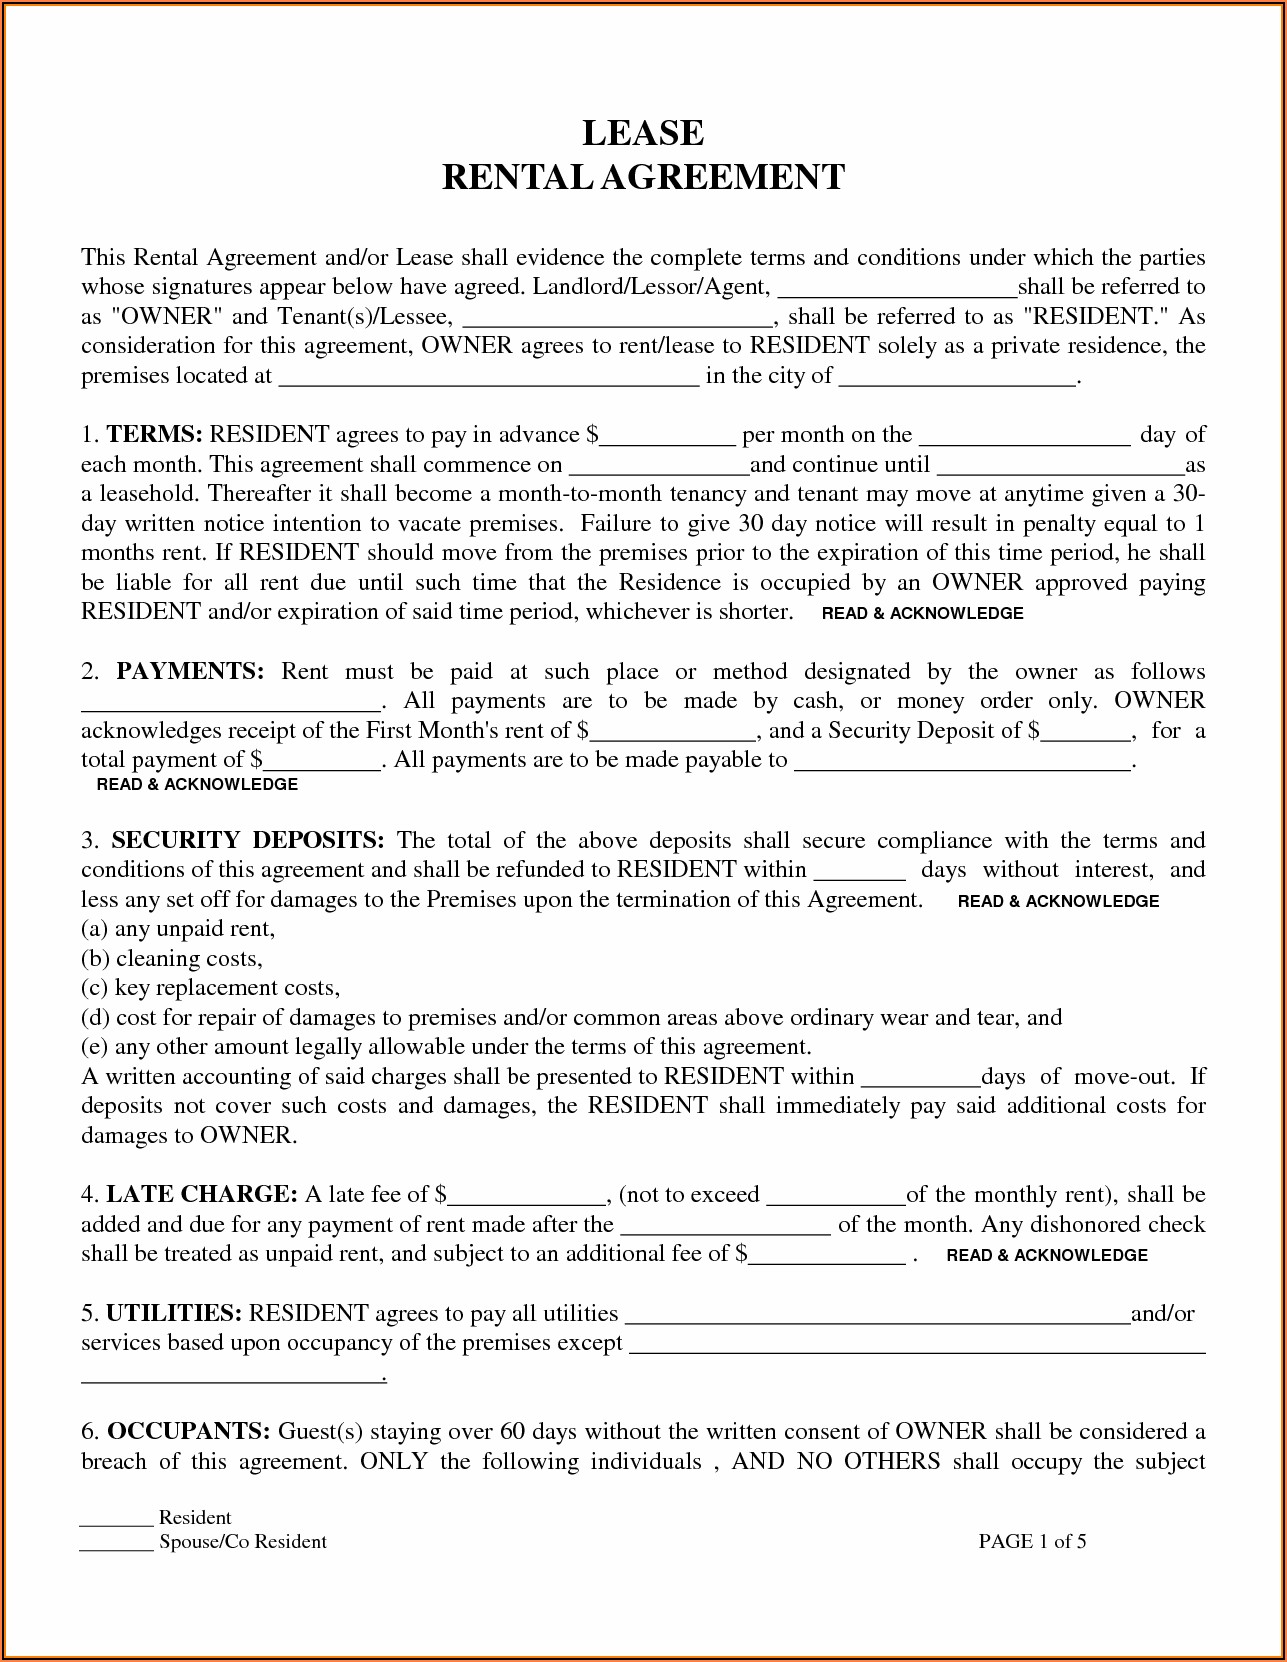 Lease Agreement Form Free Printable